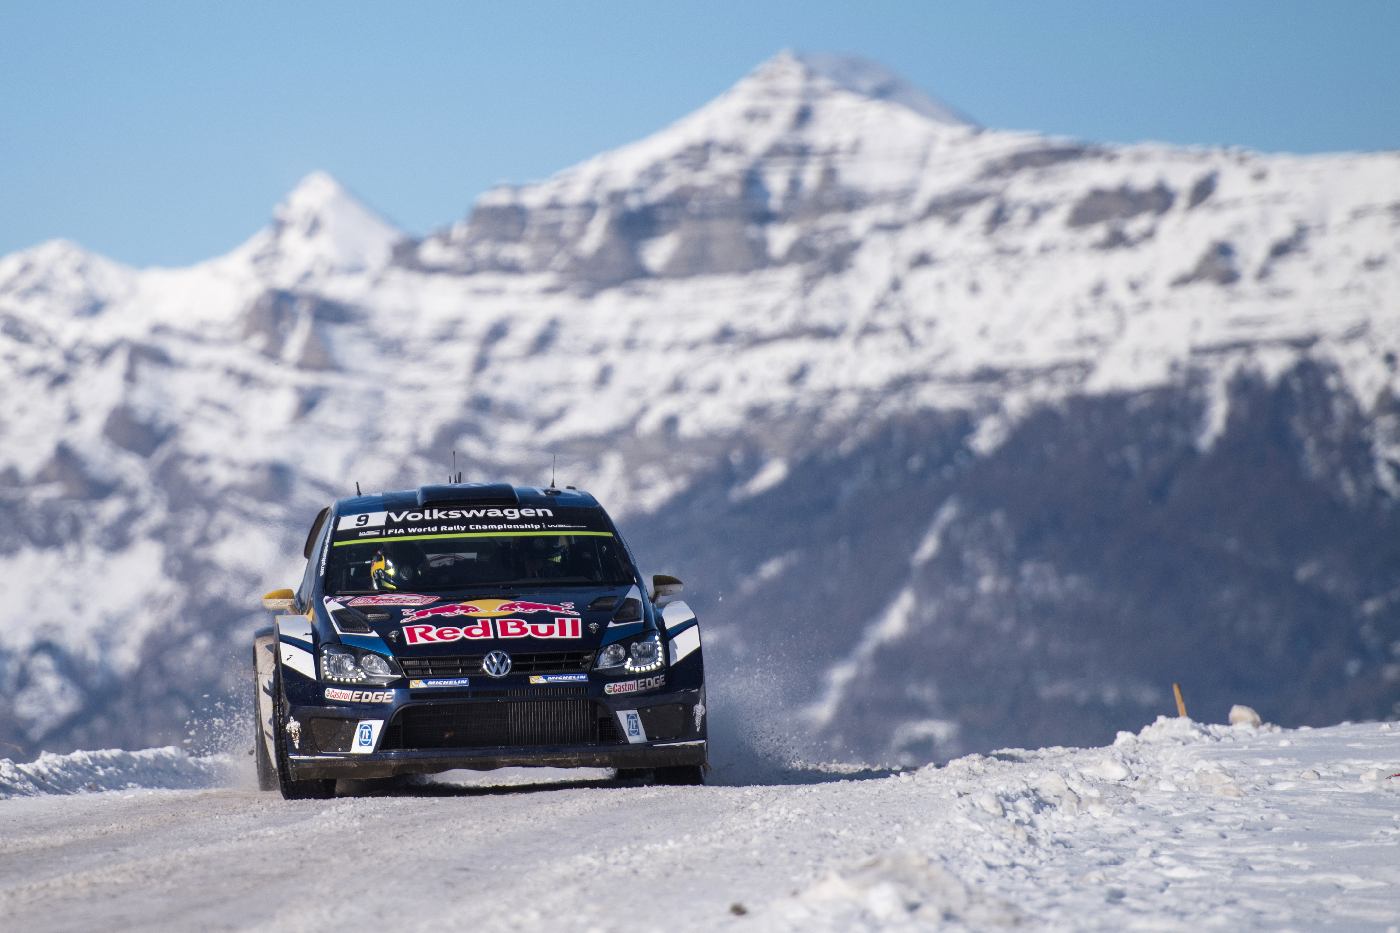 Andreas Mikkelsen (NOR) competes during the FIA World Rally Championship 2016 in Monte Carlo, Monaco on January 23, 2016